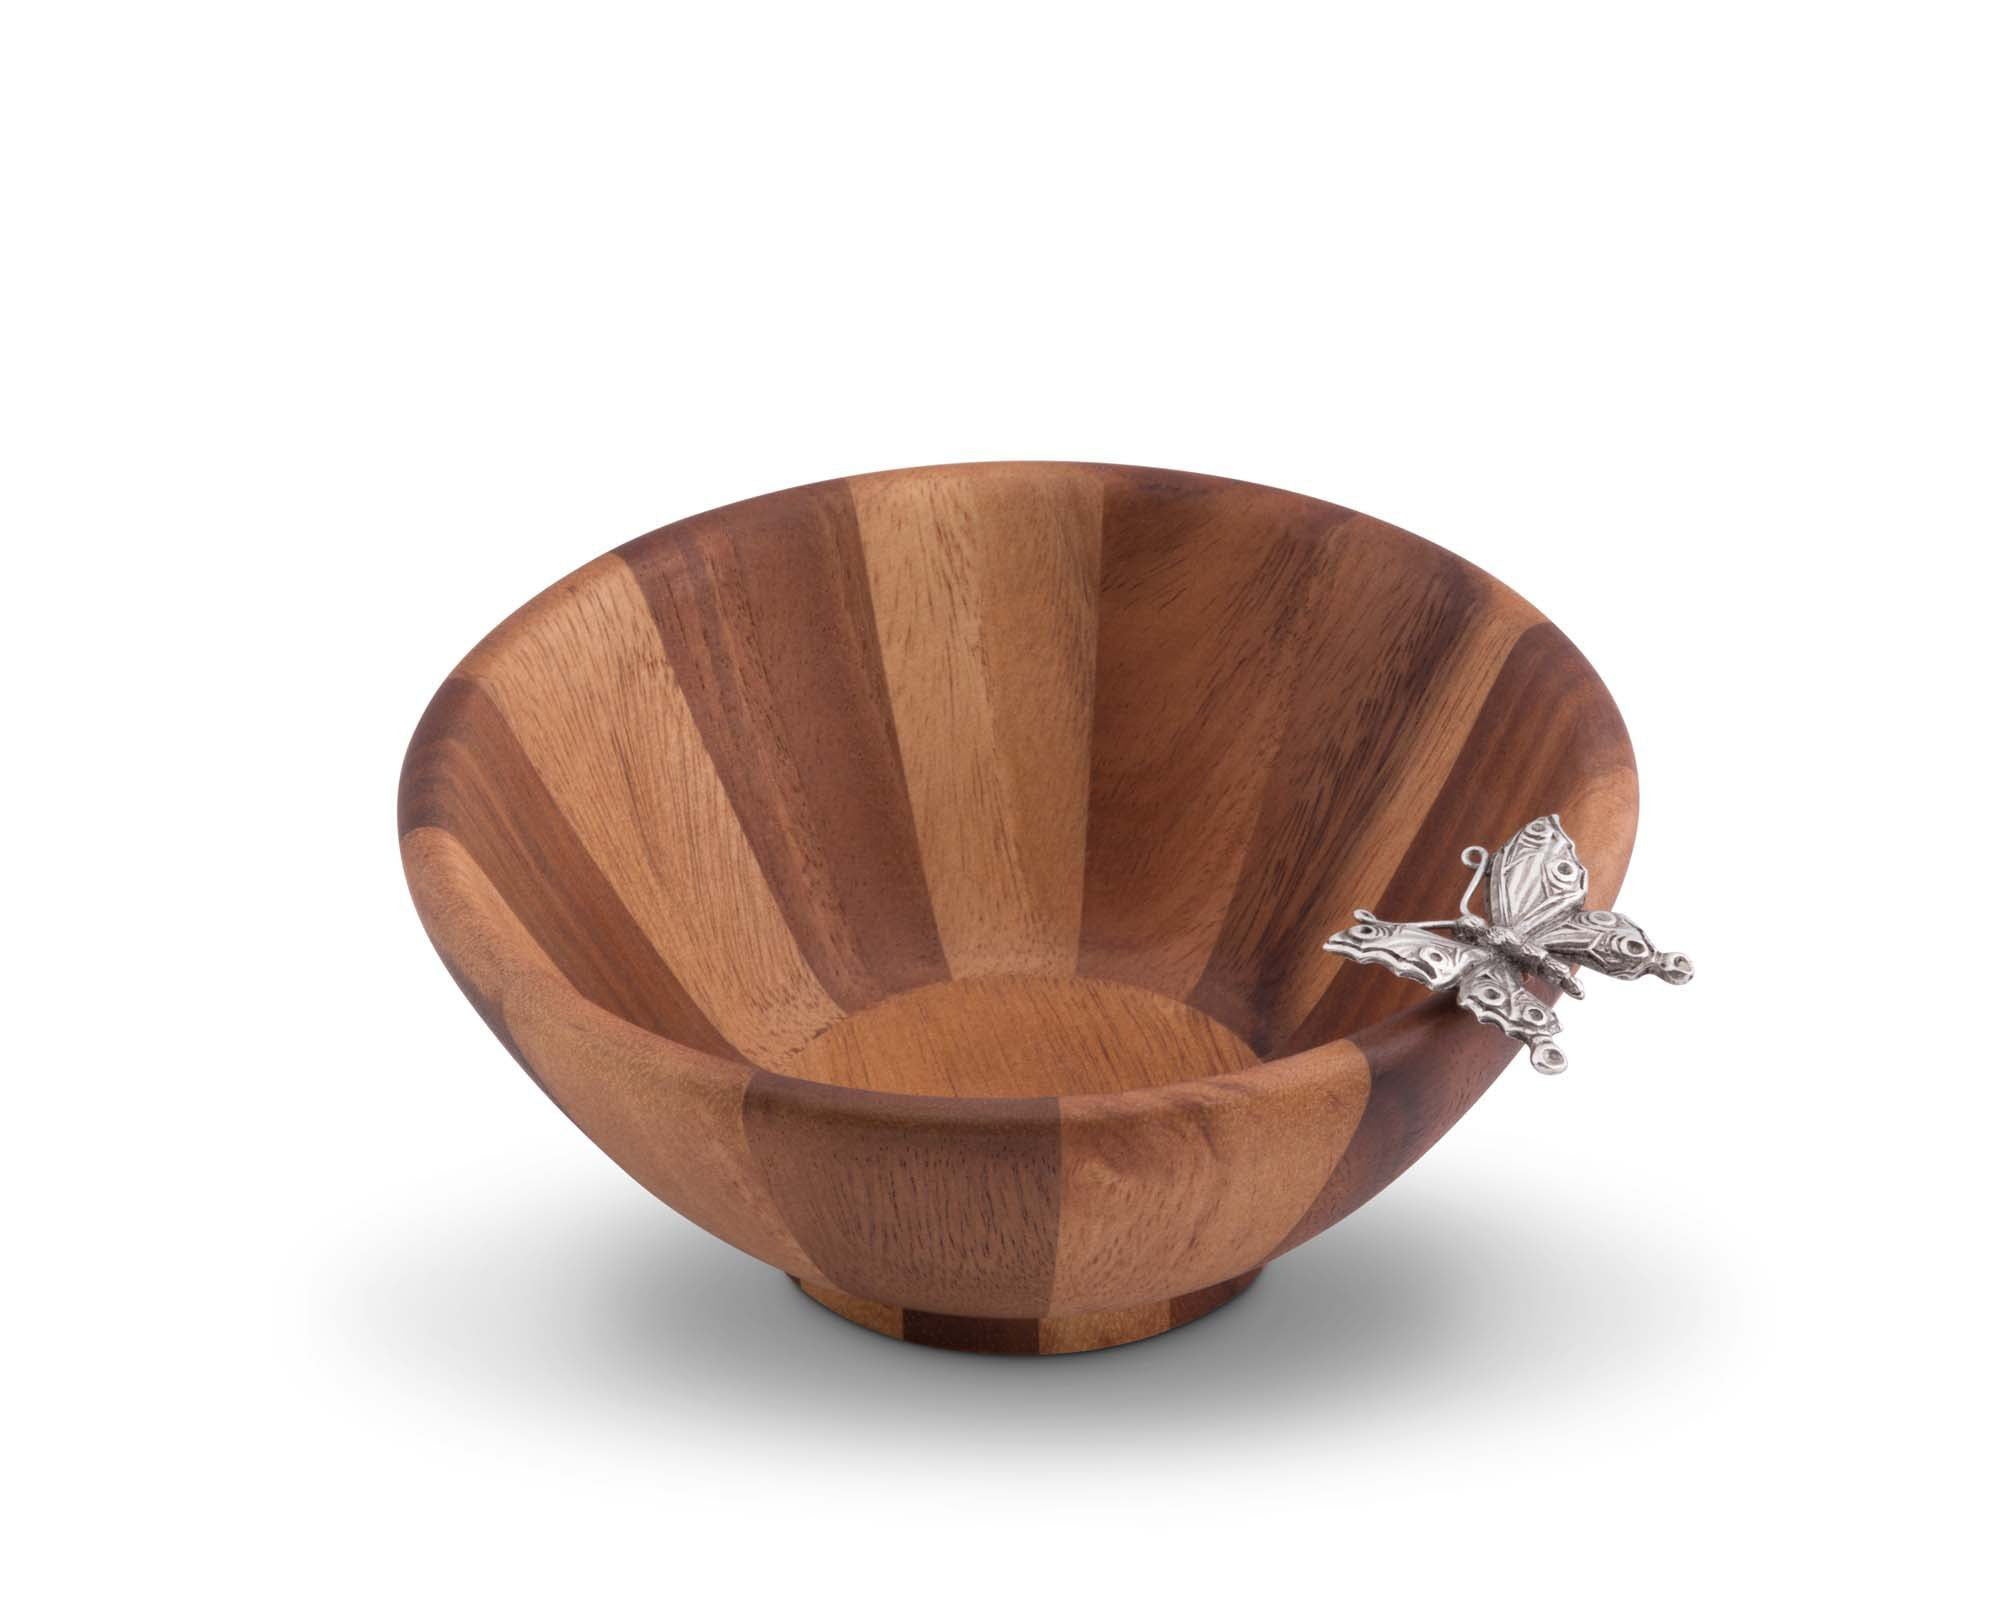 Vagabond House Butterfly Salad Bowl Small Product Image